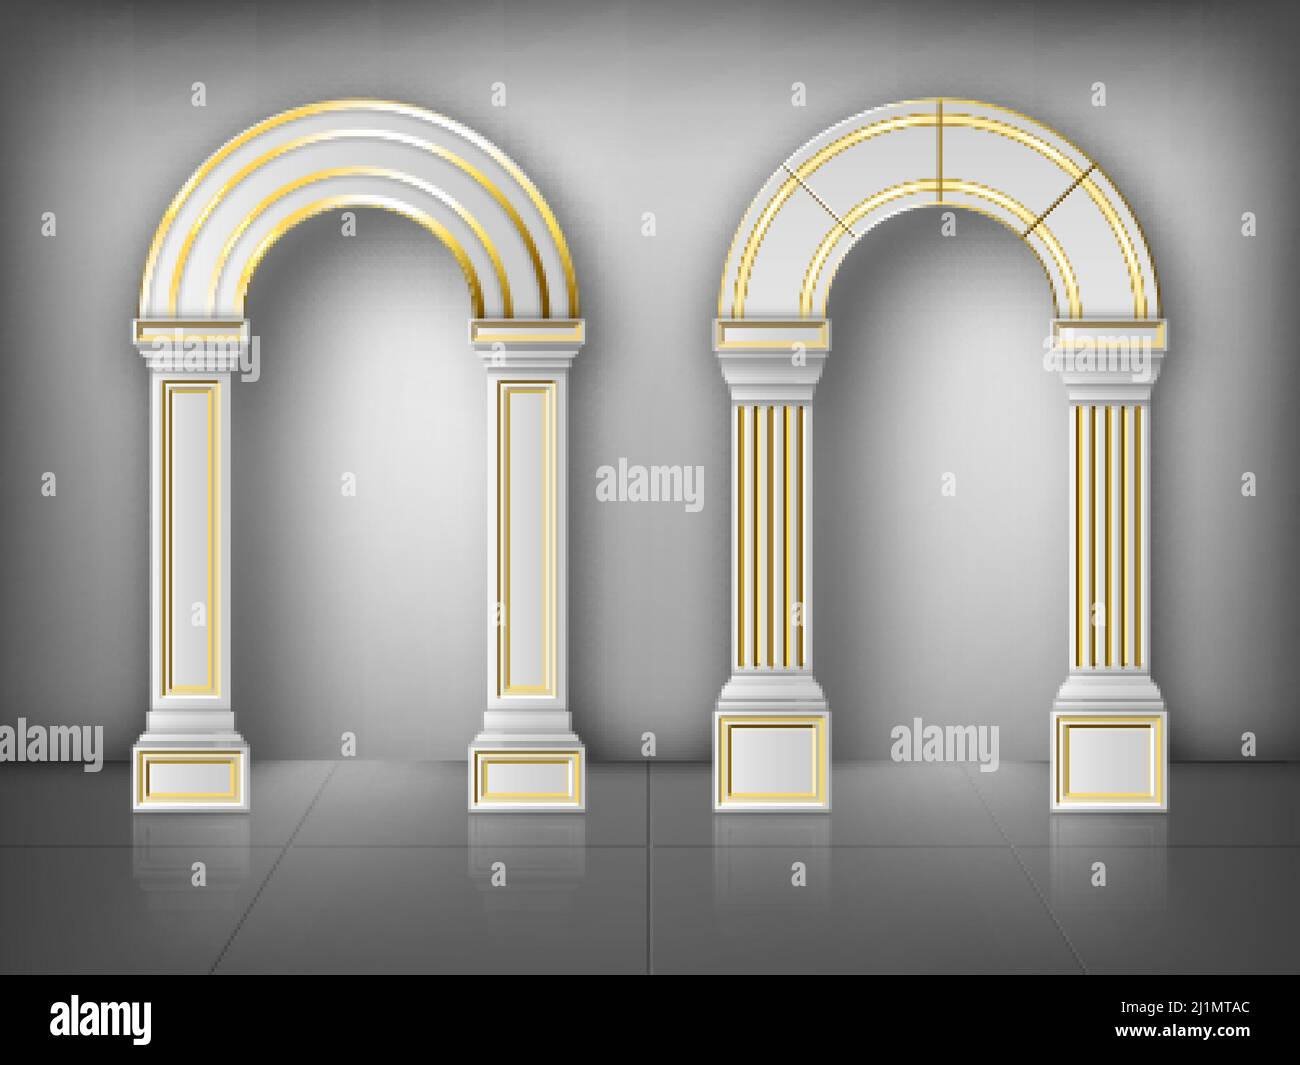 Arches with columns in wall, interior gates with white pillars and gold decoration in palace or castle. Archway frames, portal entrance, antique doorw Stock Vector